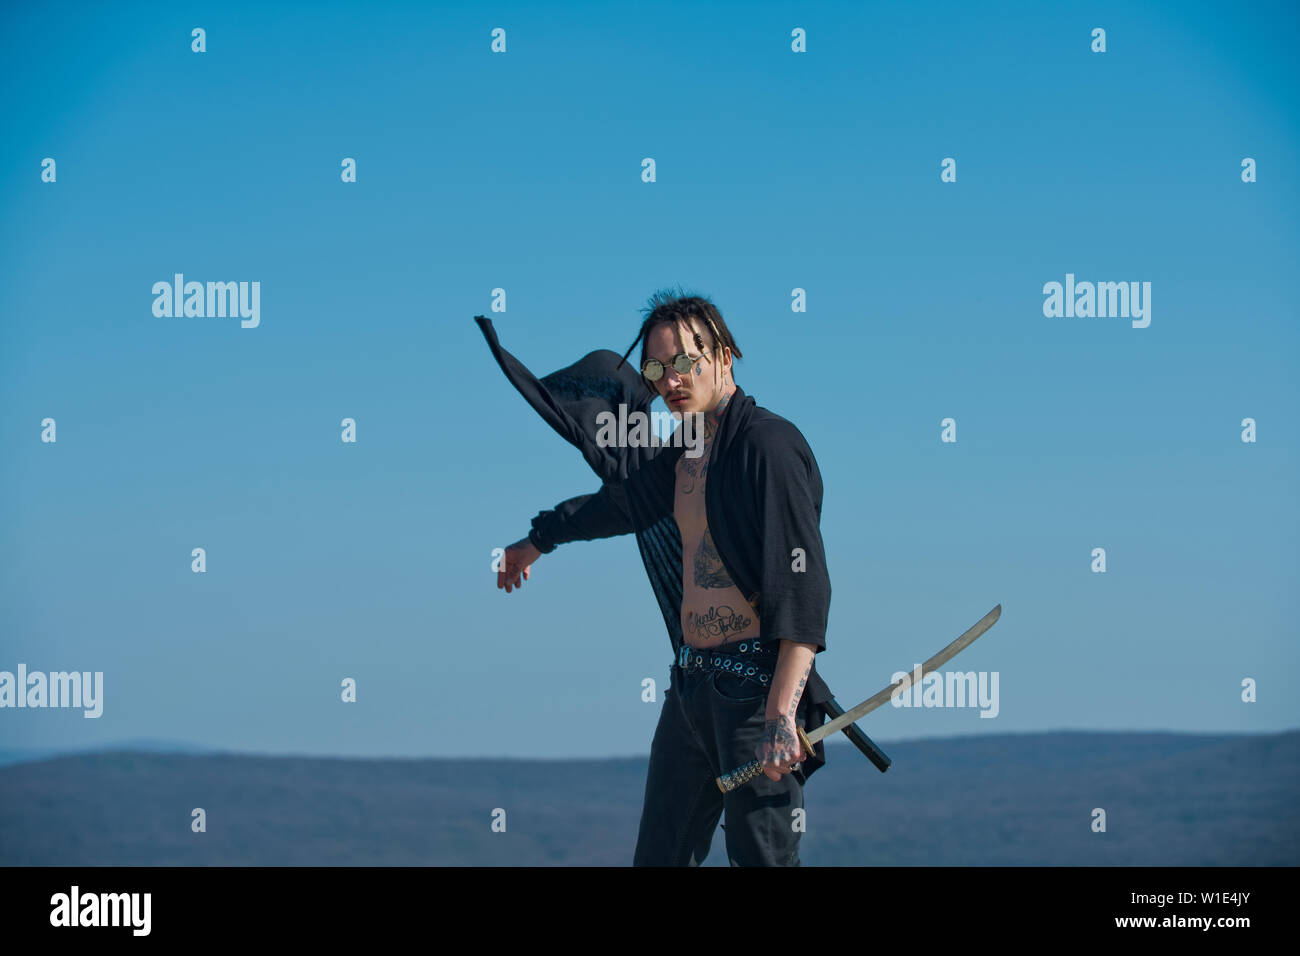 Warrior with dreadlocks and open clothes showing tattooed torso. Man with  katana sword standing on blue sky. Martial arts concept. Samurai and japan  w Stock Photo - Alamy